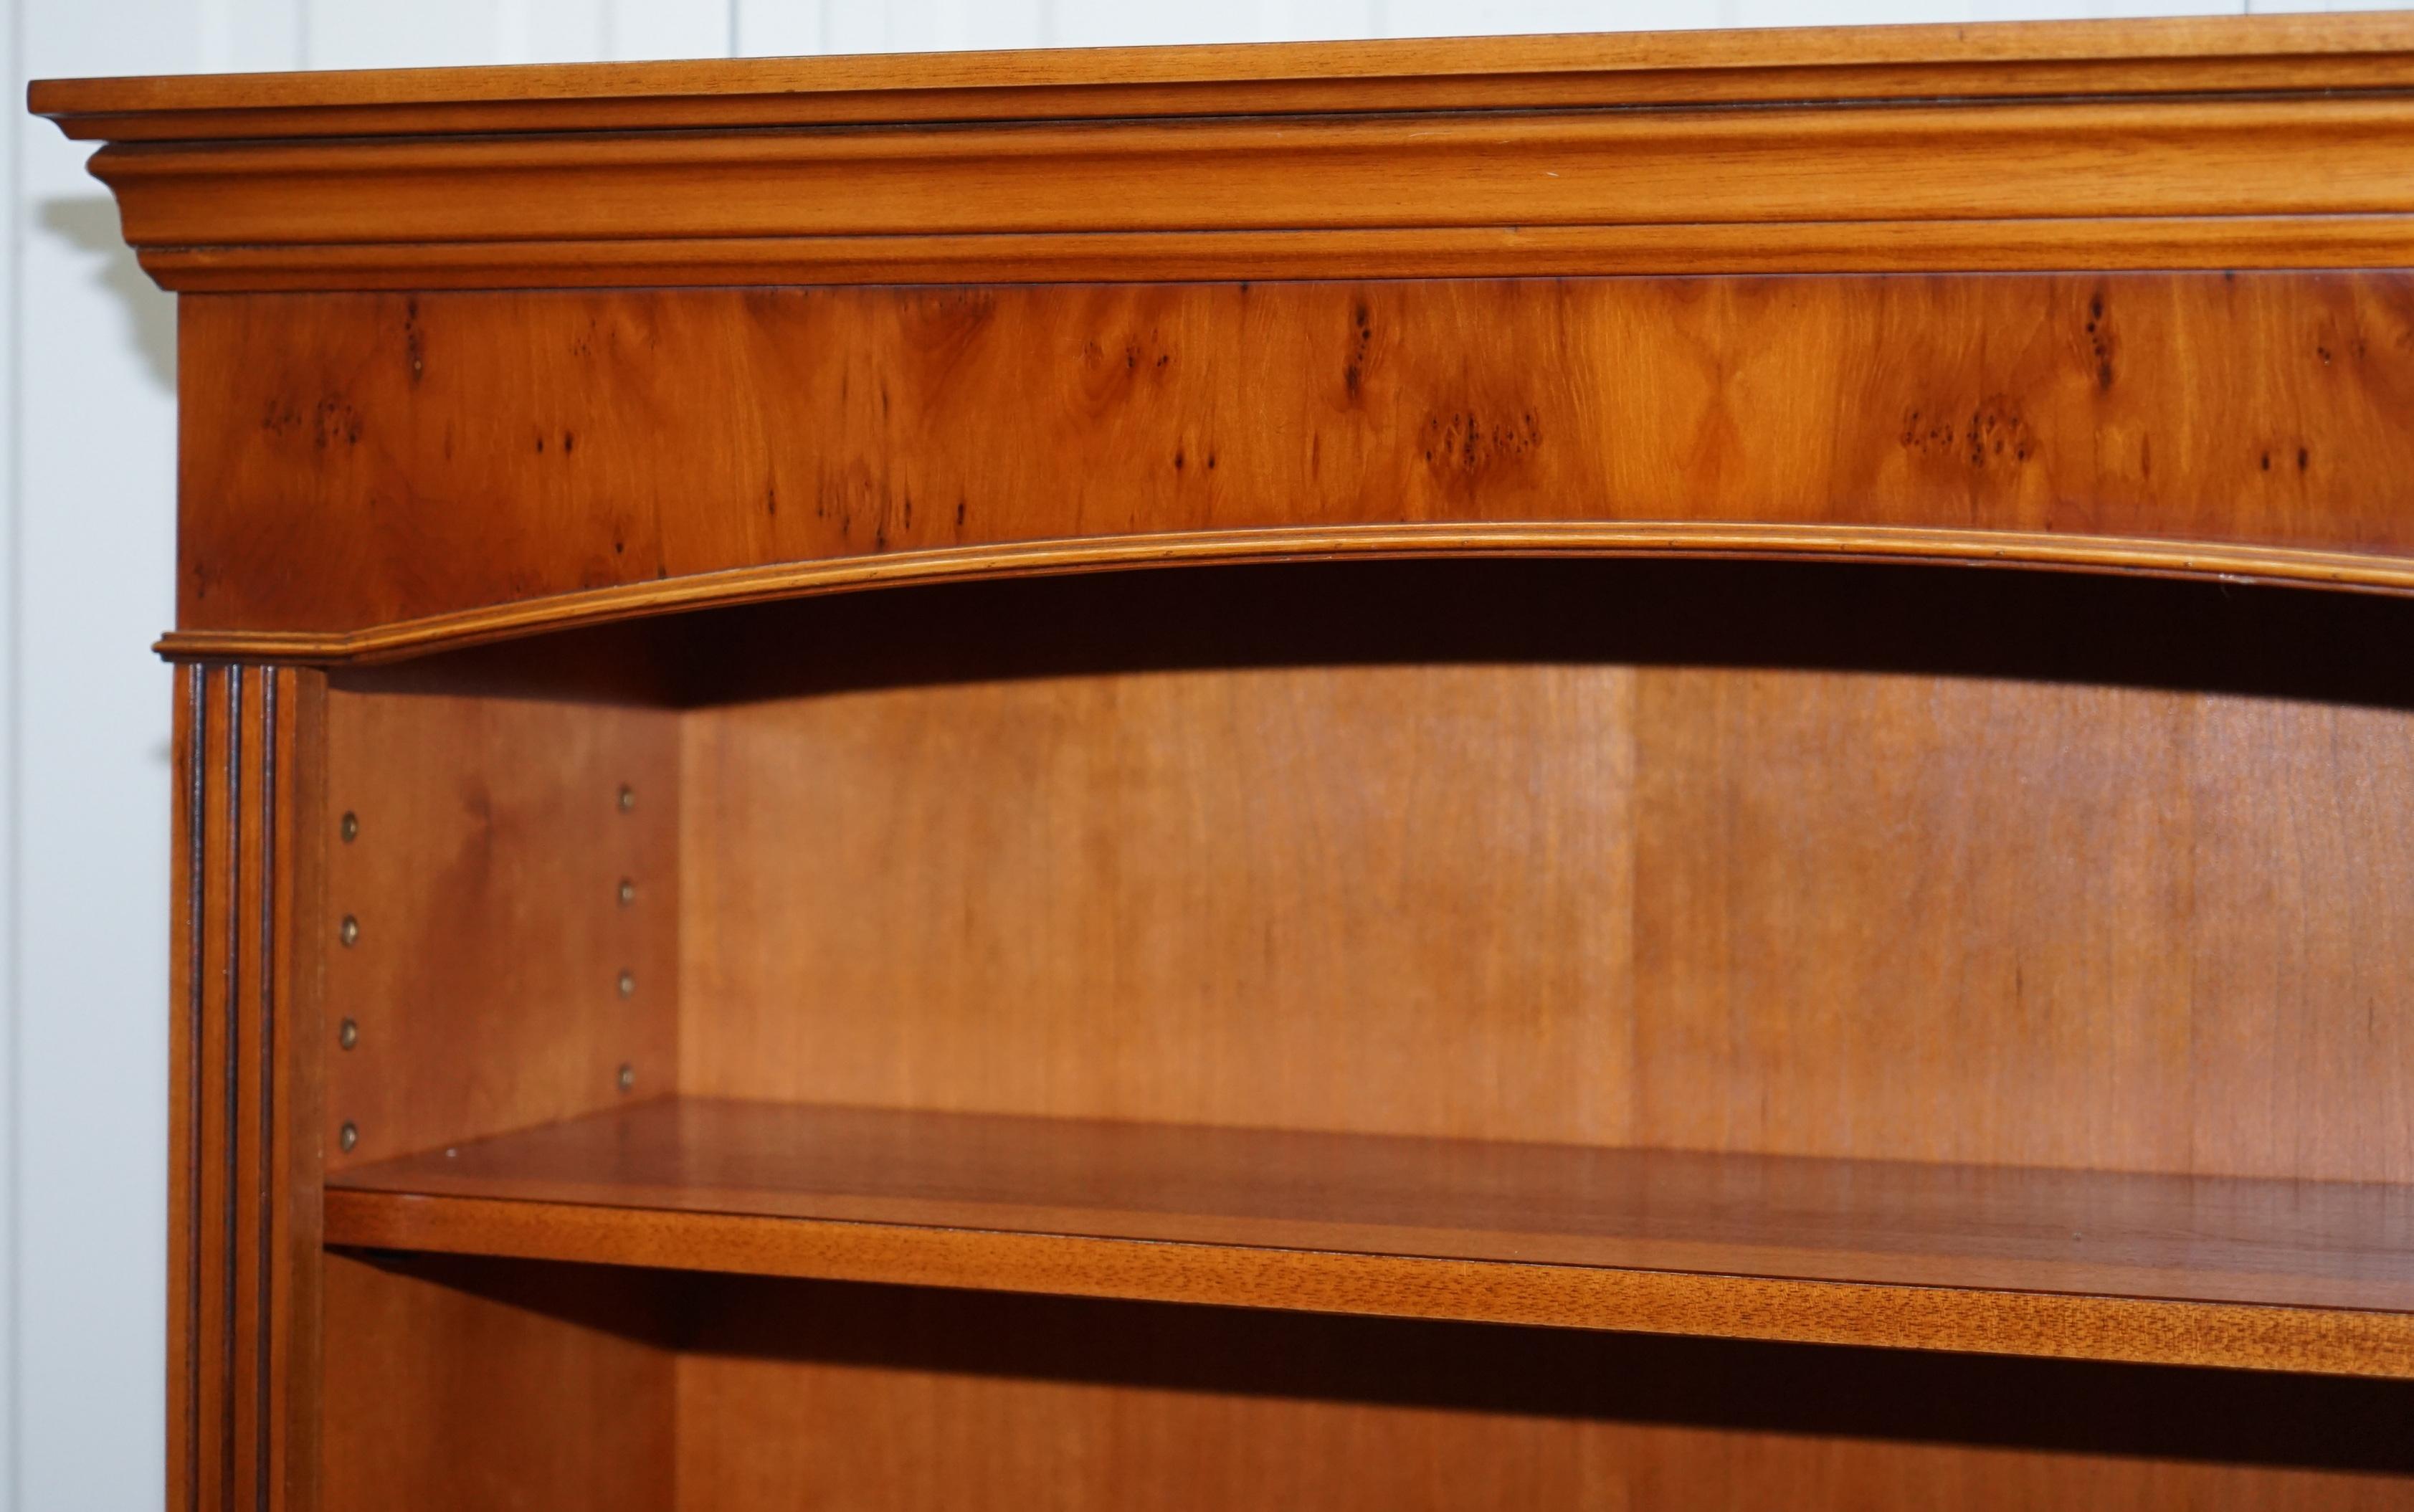 Hand-Crafted Lovely Burr Yew Wood Library Legal Bookcase with Height Adjustable Shelves